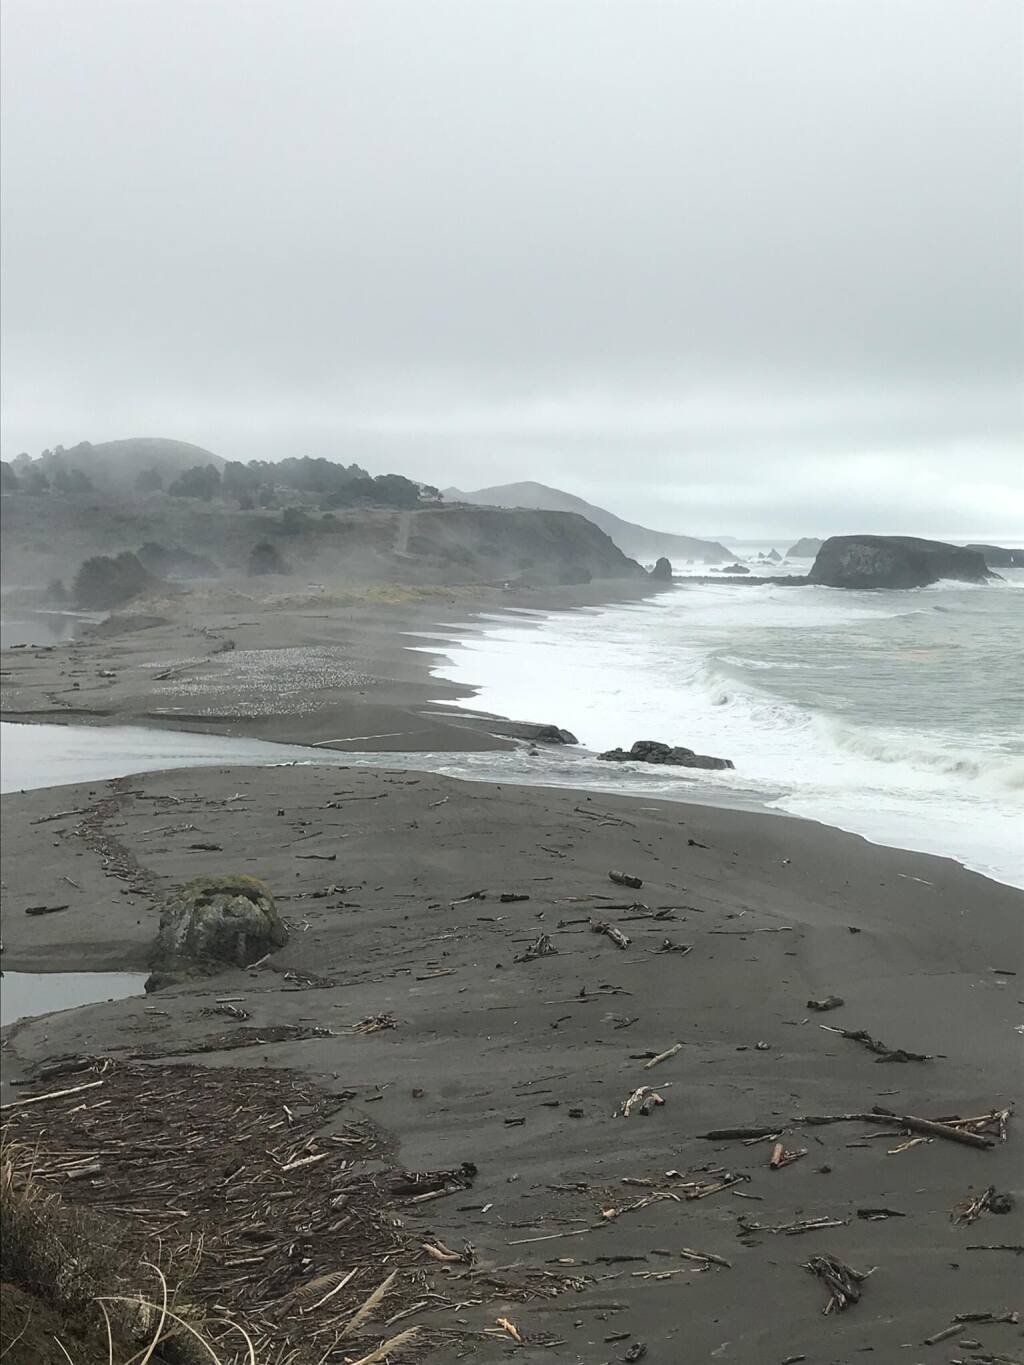 The mouth of the Russian River at the Sonoma Coast on Jan. 8, 2021, as water levels recede. (Sonoma County Sheriff’s Office / Twitter)